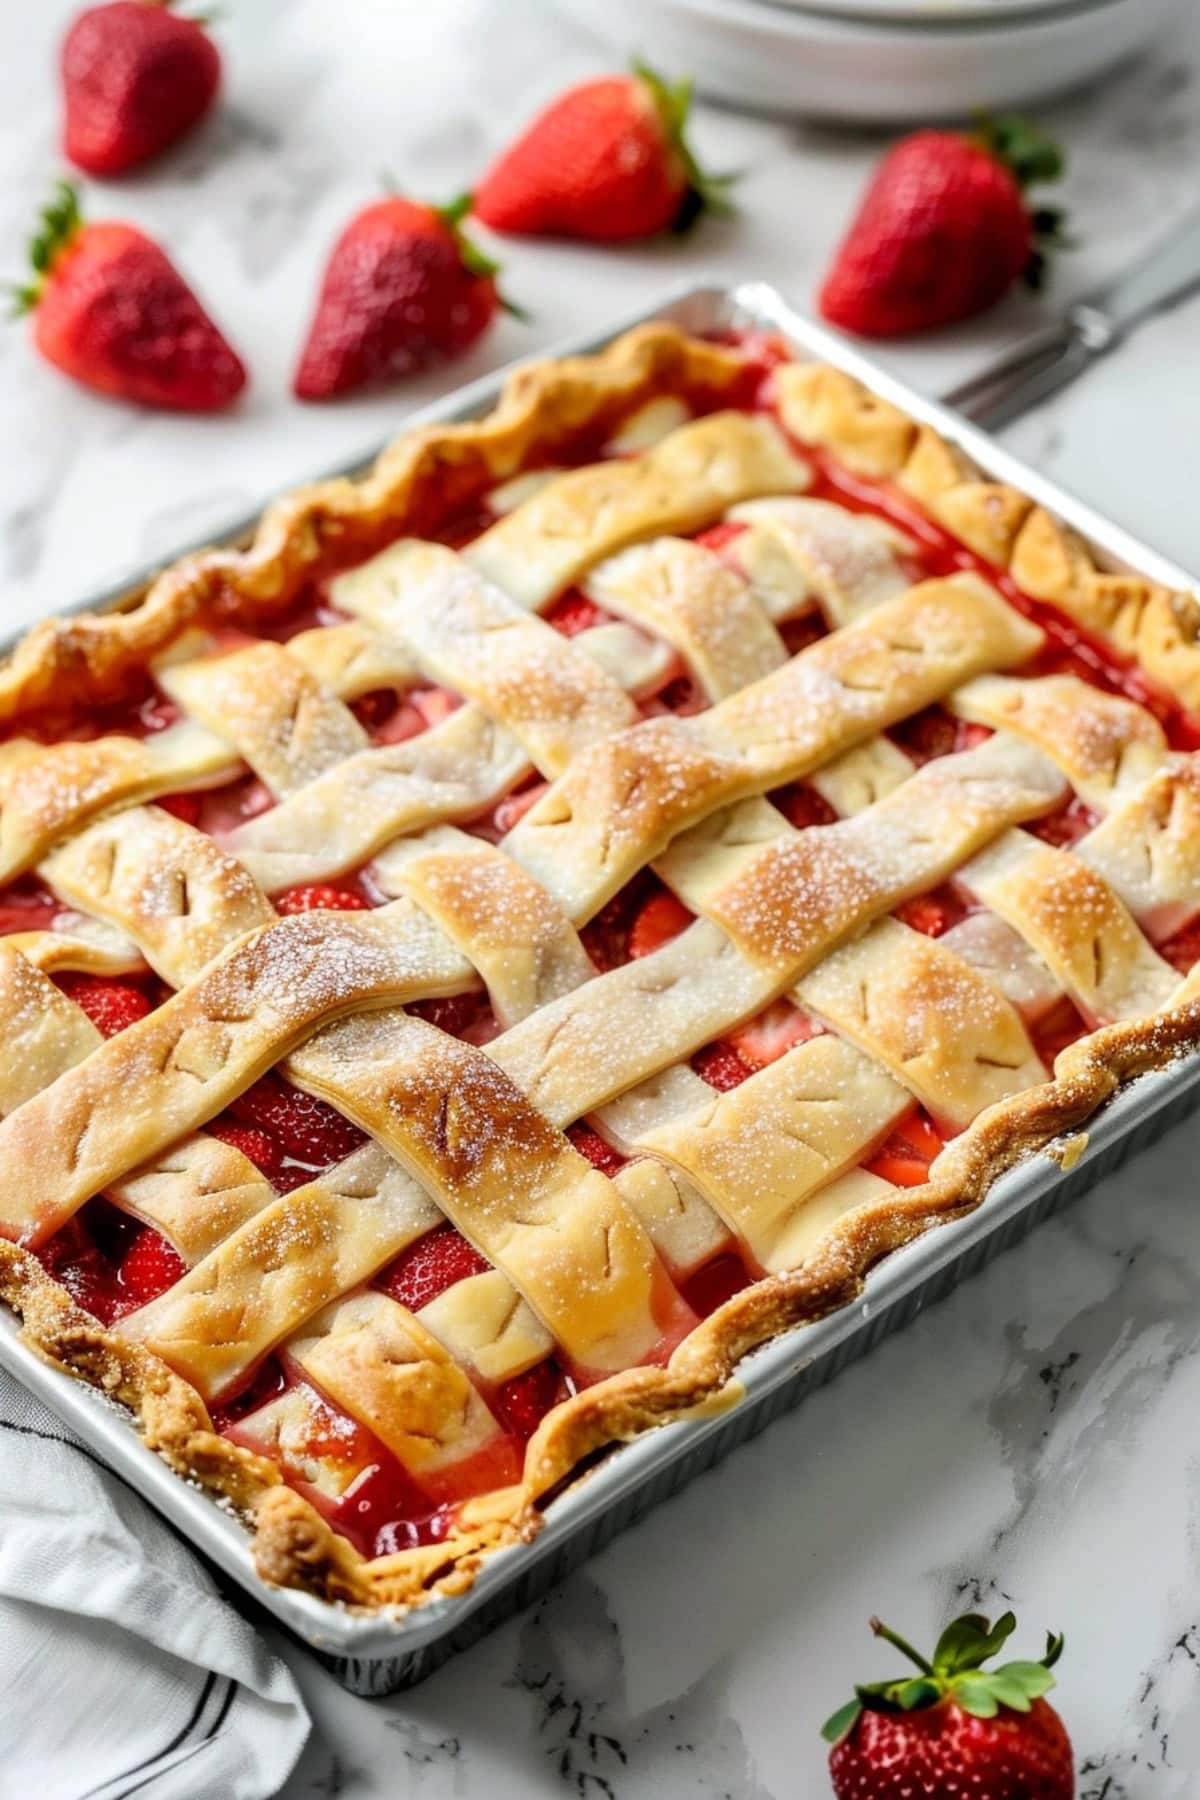 Strawberry slab pie in a rectangular baking pan with lattice top